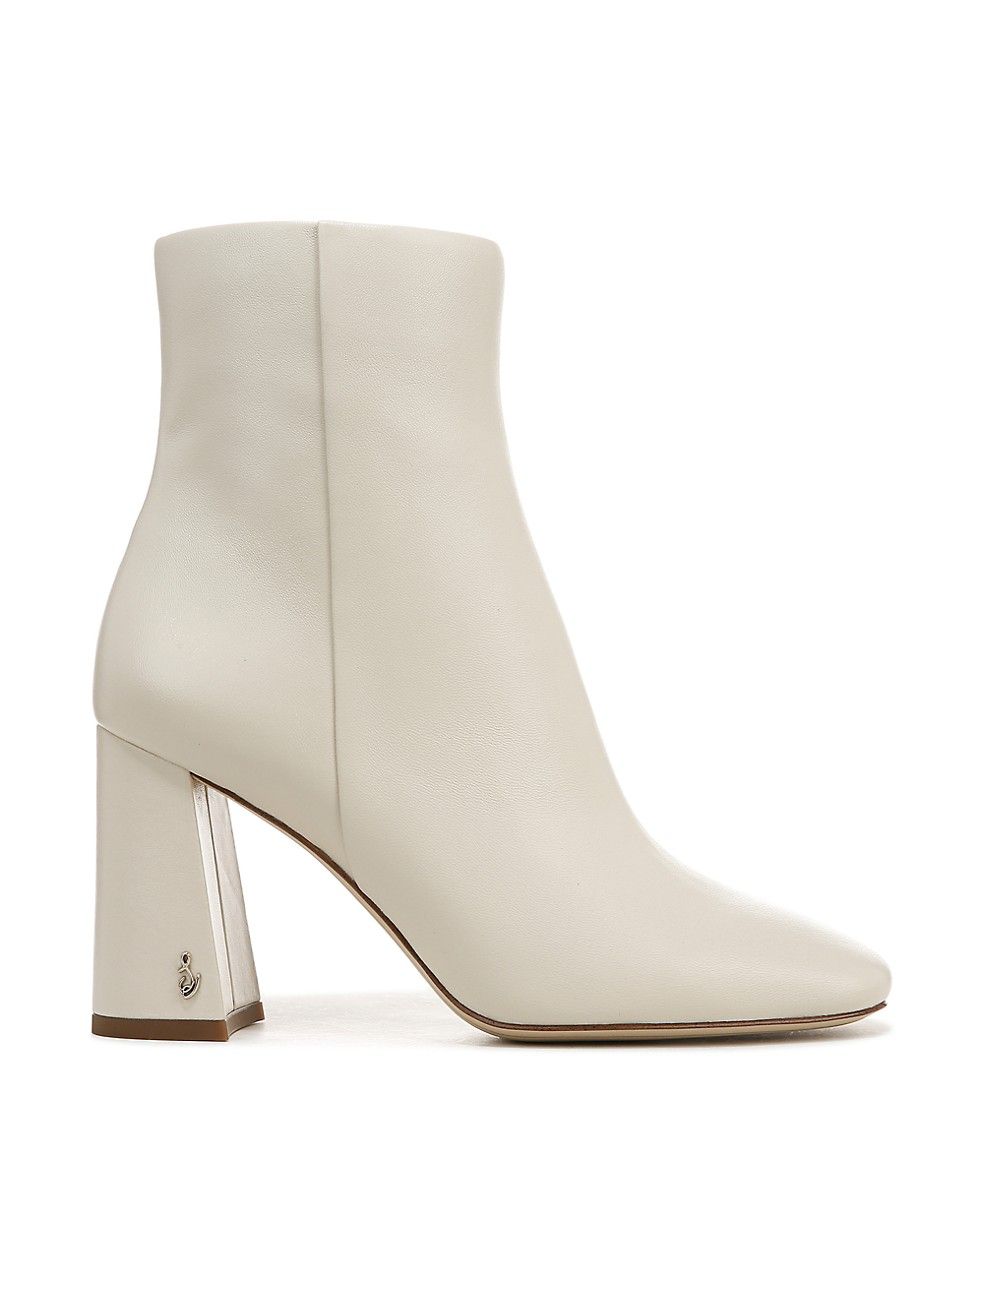 Codie Leather Pyramid Ankle Boots | Saks Fifth Avenue